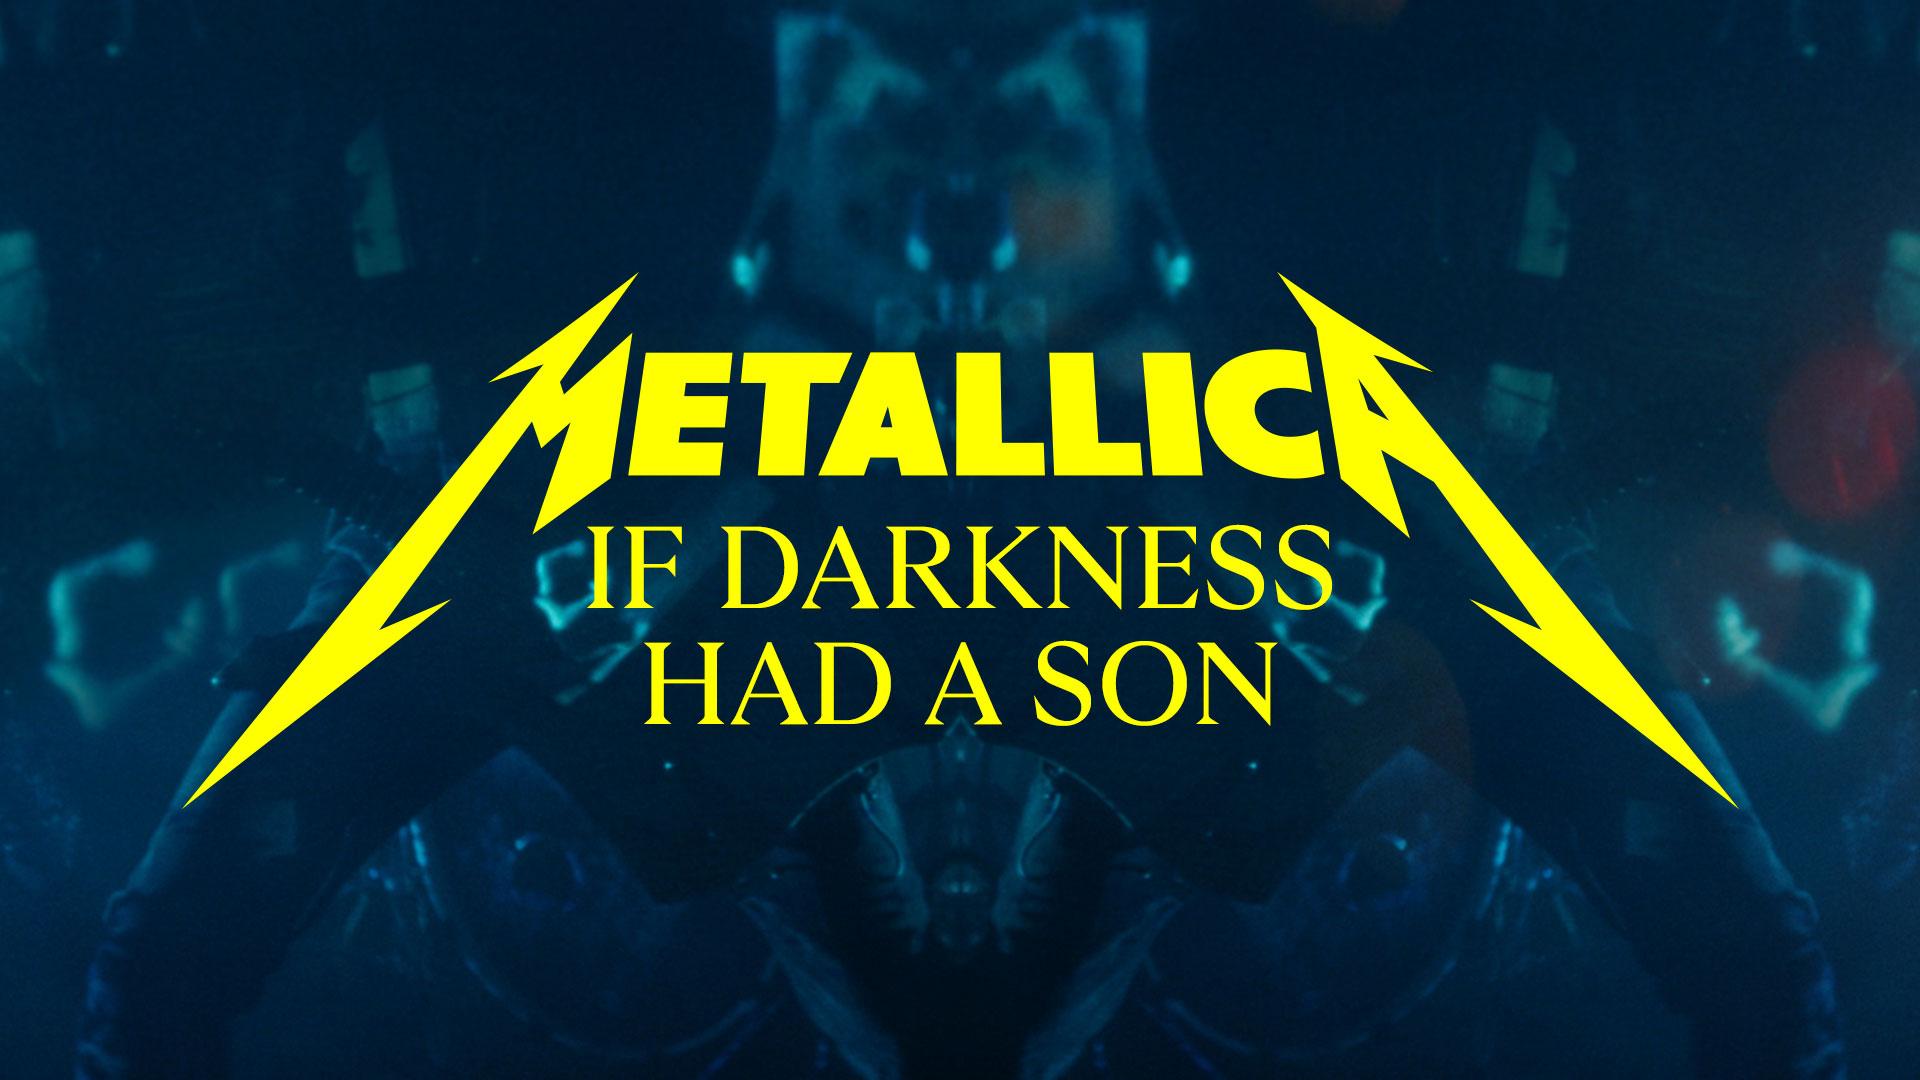 Watch Metallica's official music video for "If Darkness Had a Son" from the album "72 Seasons"